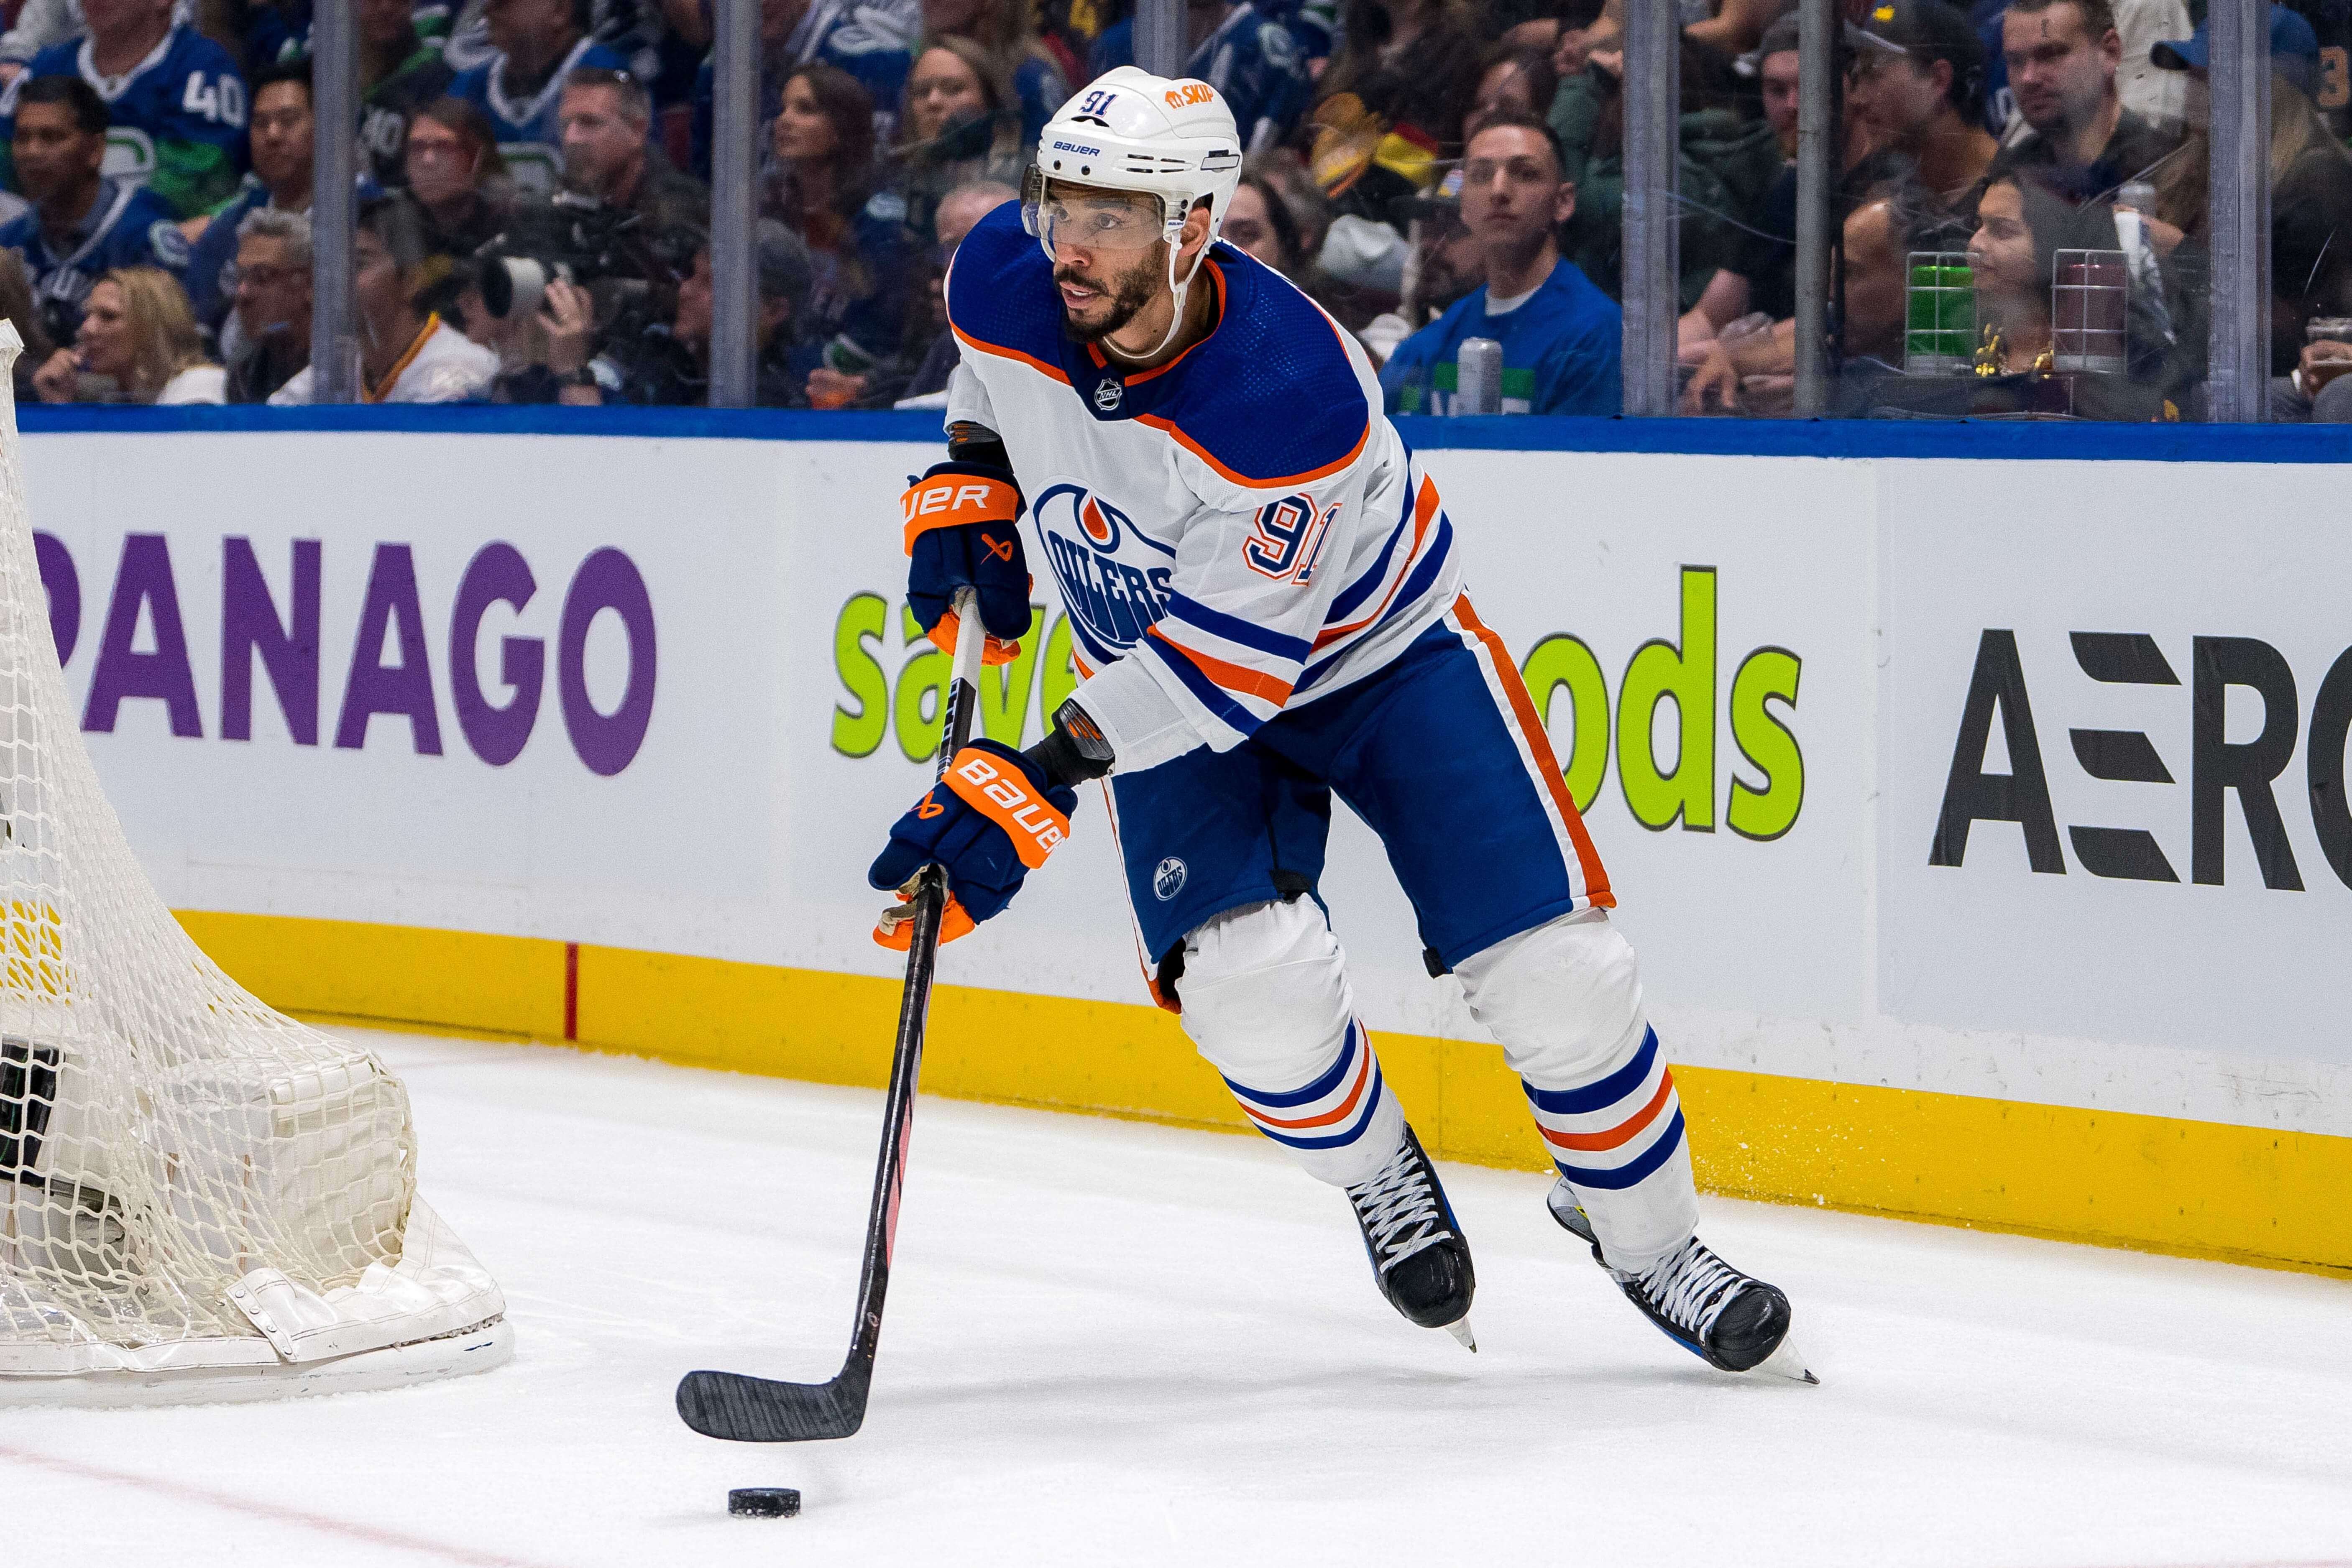 How To Bet - Oilers vs Stars Same-Game Parlay Picks for Tonight's Game